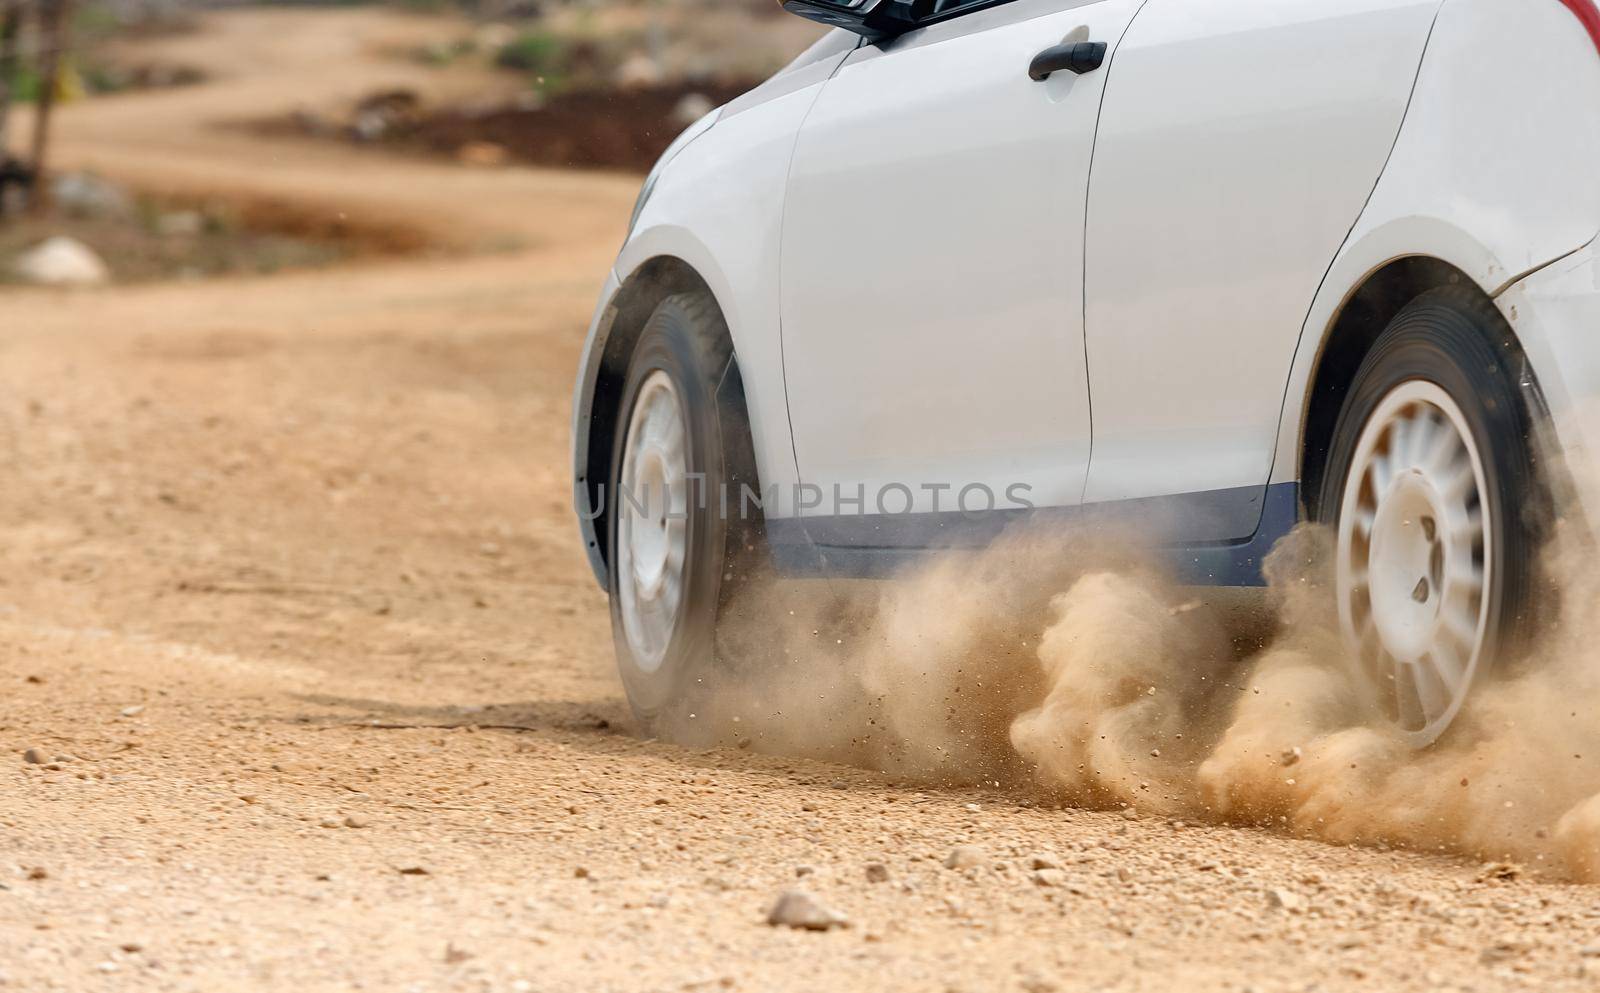 Rally car in dirt track.